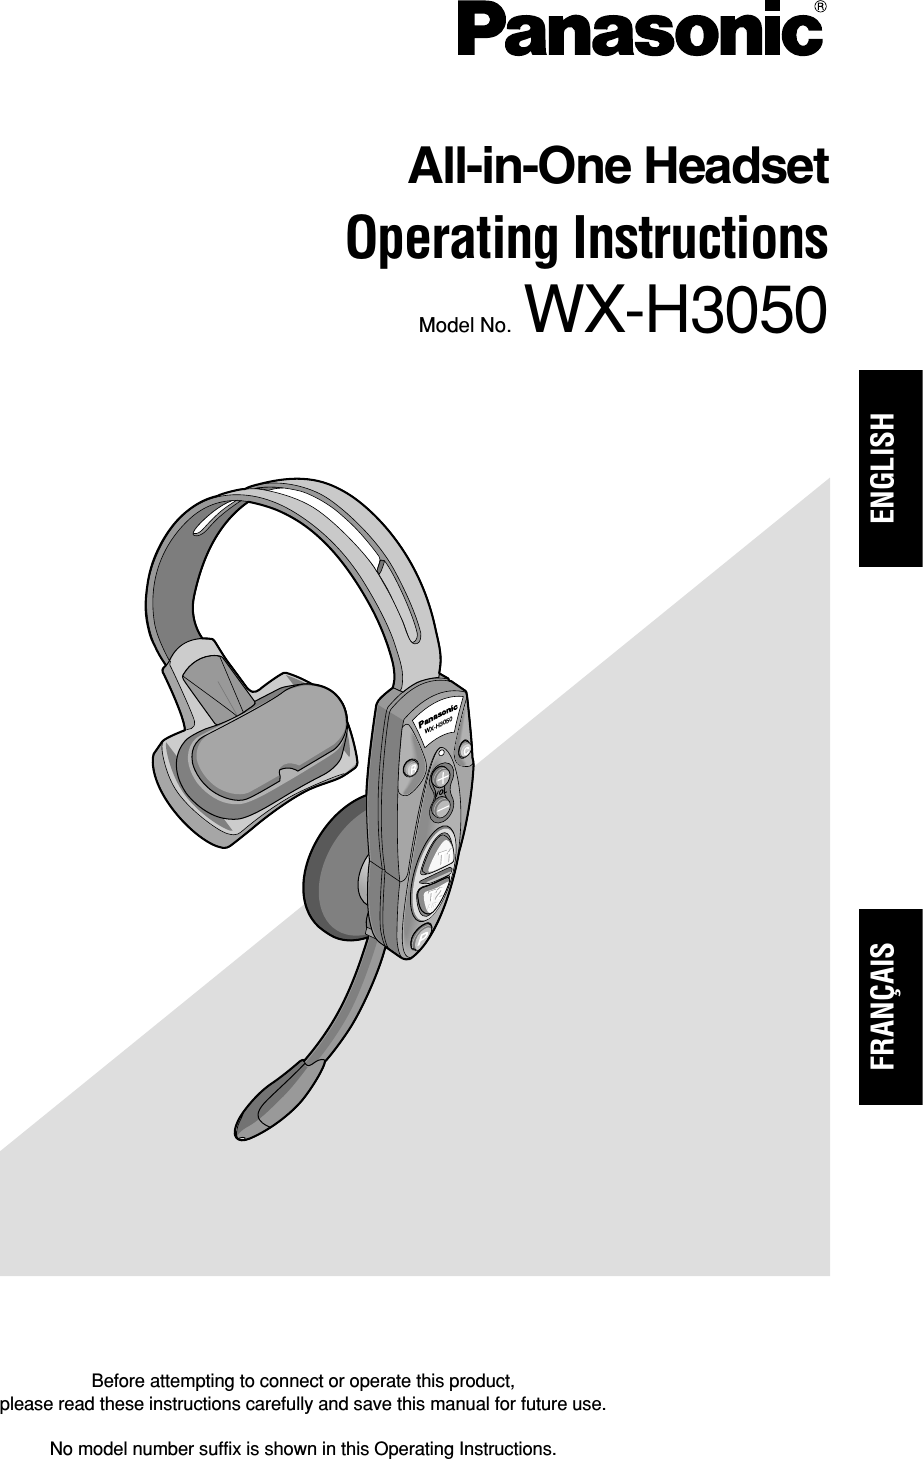 WX-H3050All-in-One HeadsetOperating Instructions Model No.  WX-H3050Before attempting to connect or operate this product, please read these instructions carefully and save this manual for future use.No model number suffix is shown in this Operating Instructions.ENGLISHFRANÇAIS